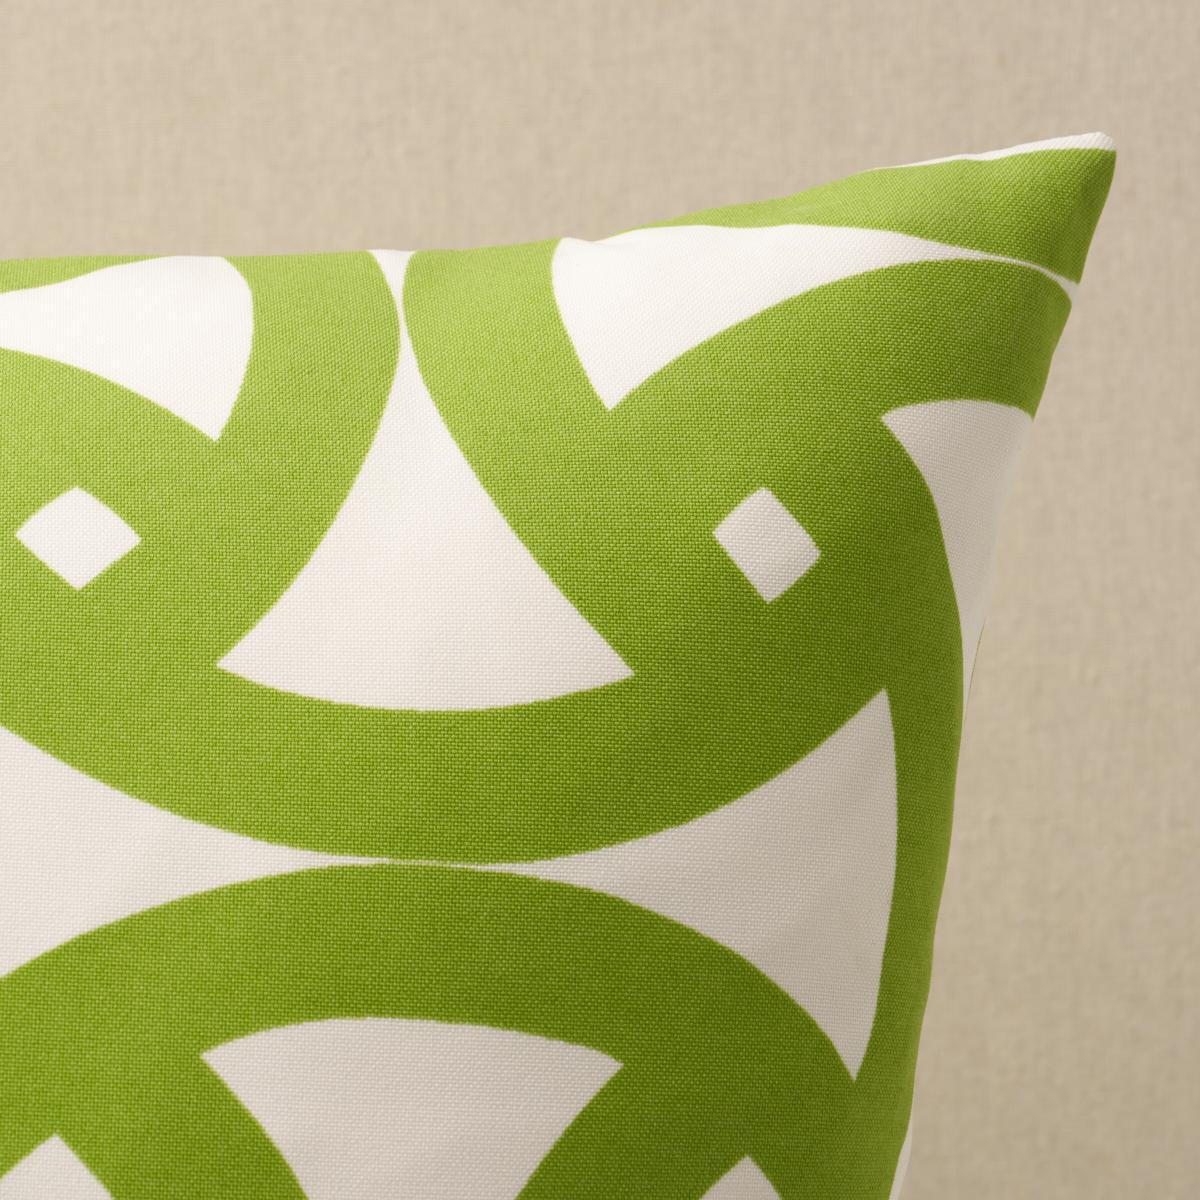 This pillow features Santorini Print Indoor/Outdoor by Trina Turk with a knife edge finish. An exuberant pattern of interlocking curves, Santorini has a bold flair. The graphic geometric is printed on acrylic making it a durable option for both